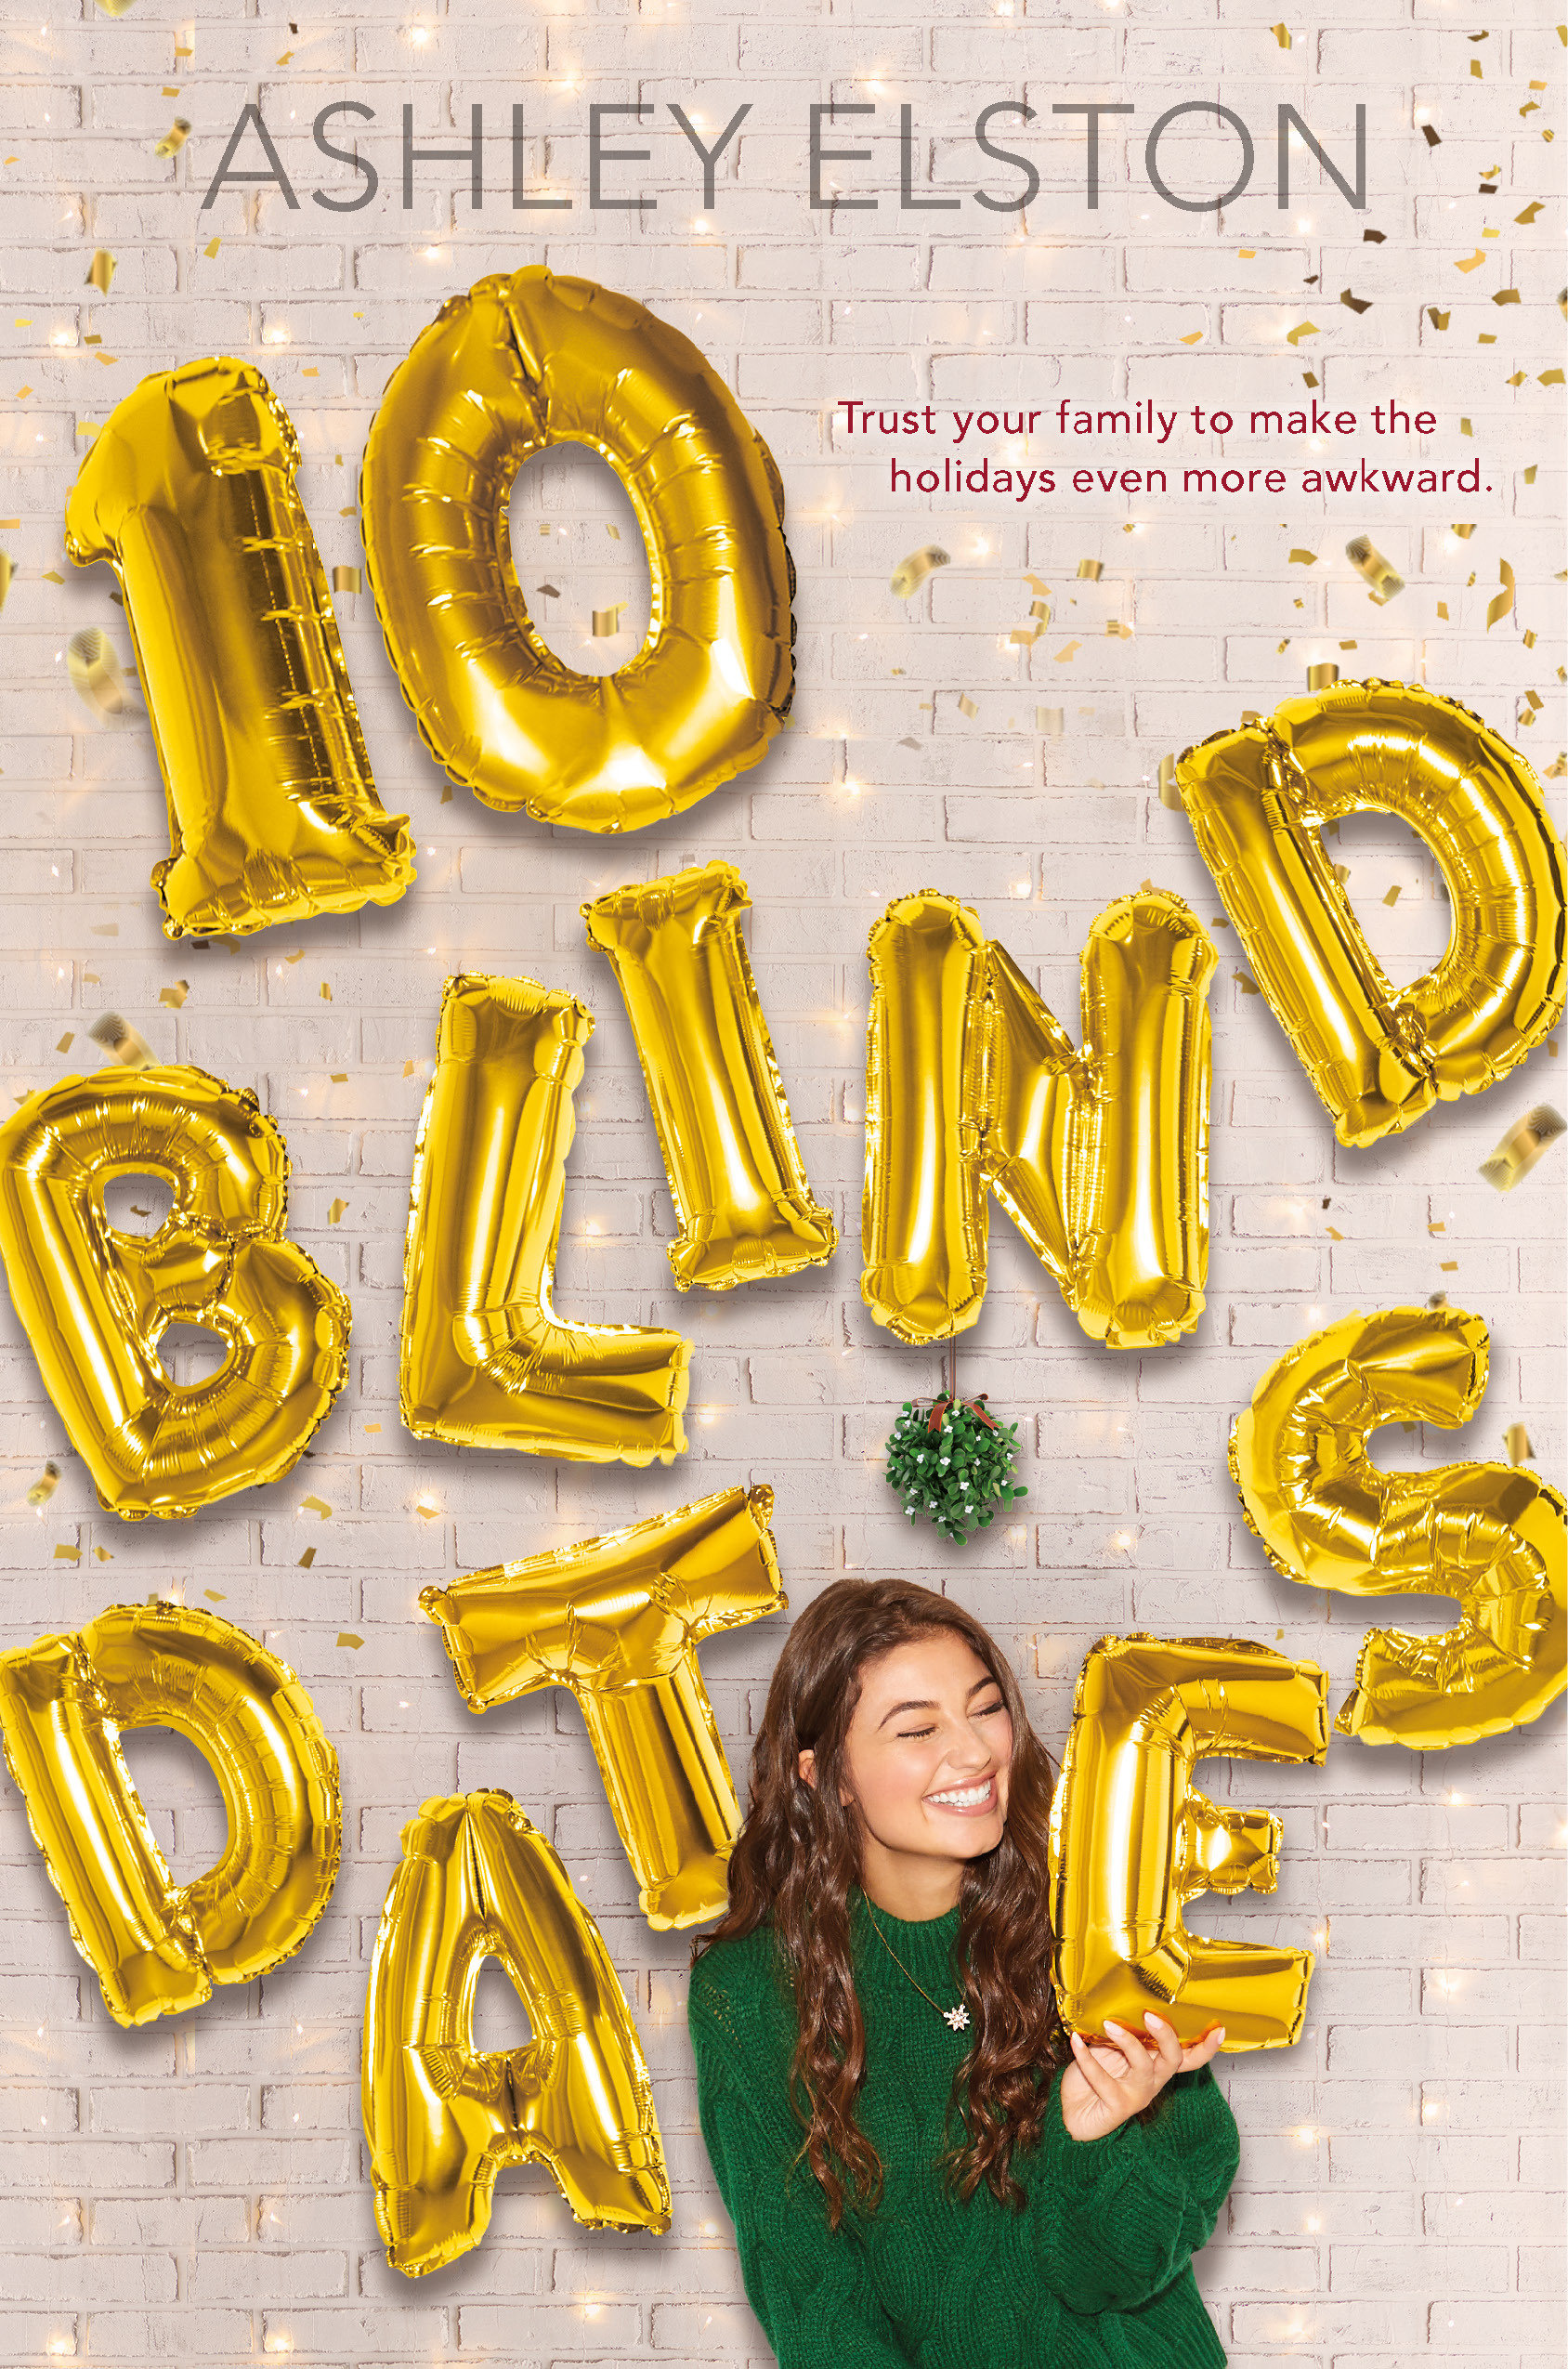 10 Blind Dates (Hardcover Book)